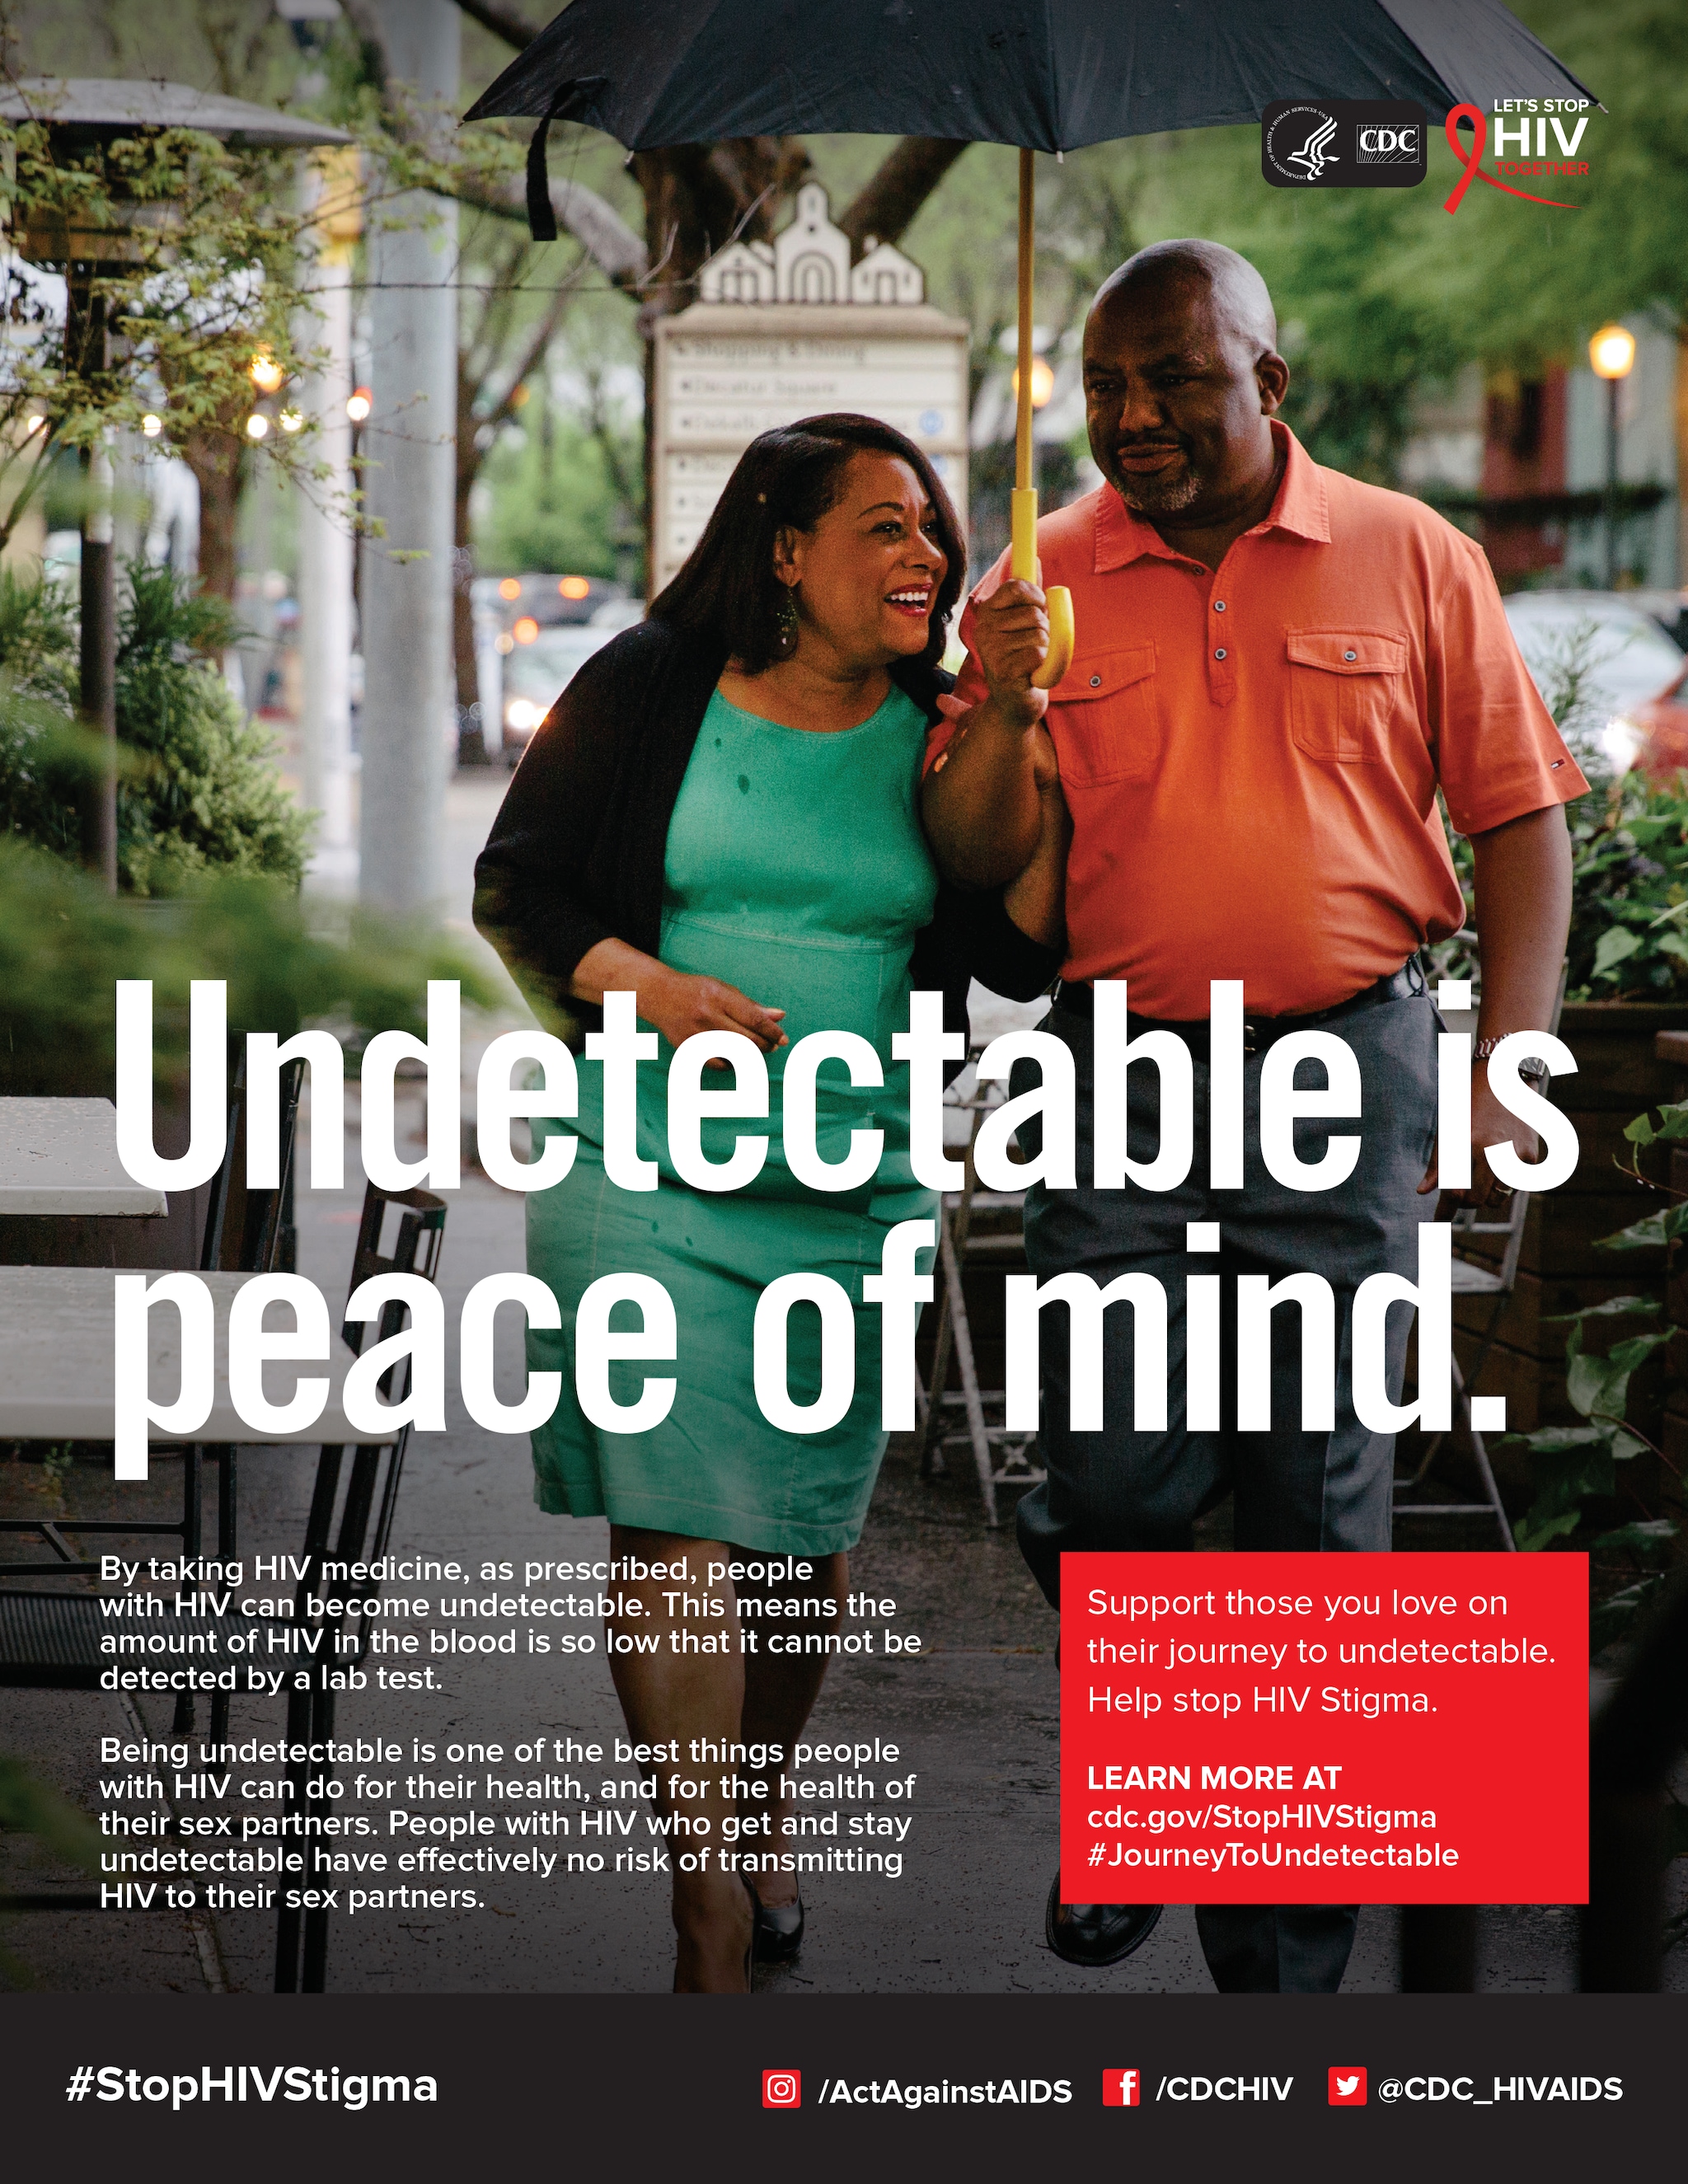 Undetectable is Peace of Mind